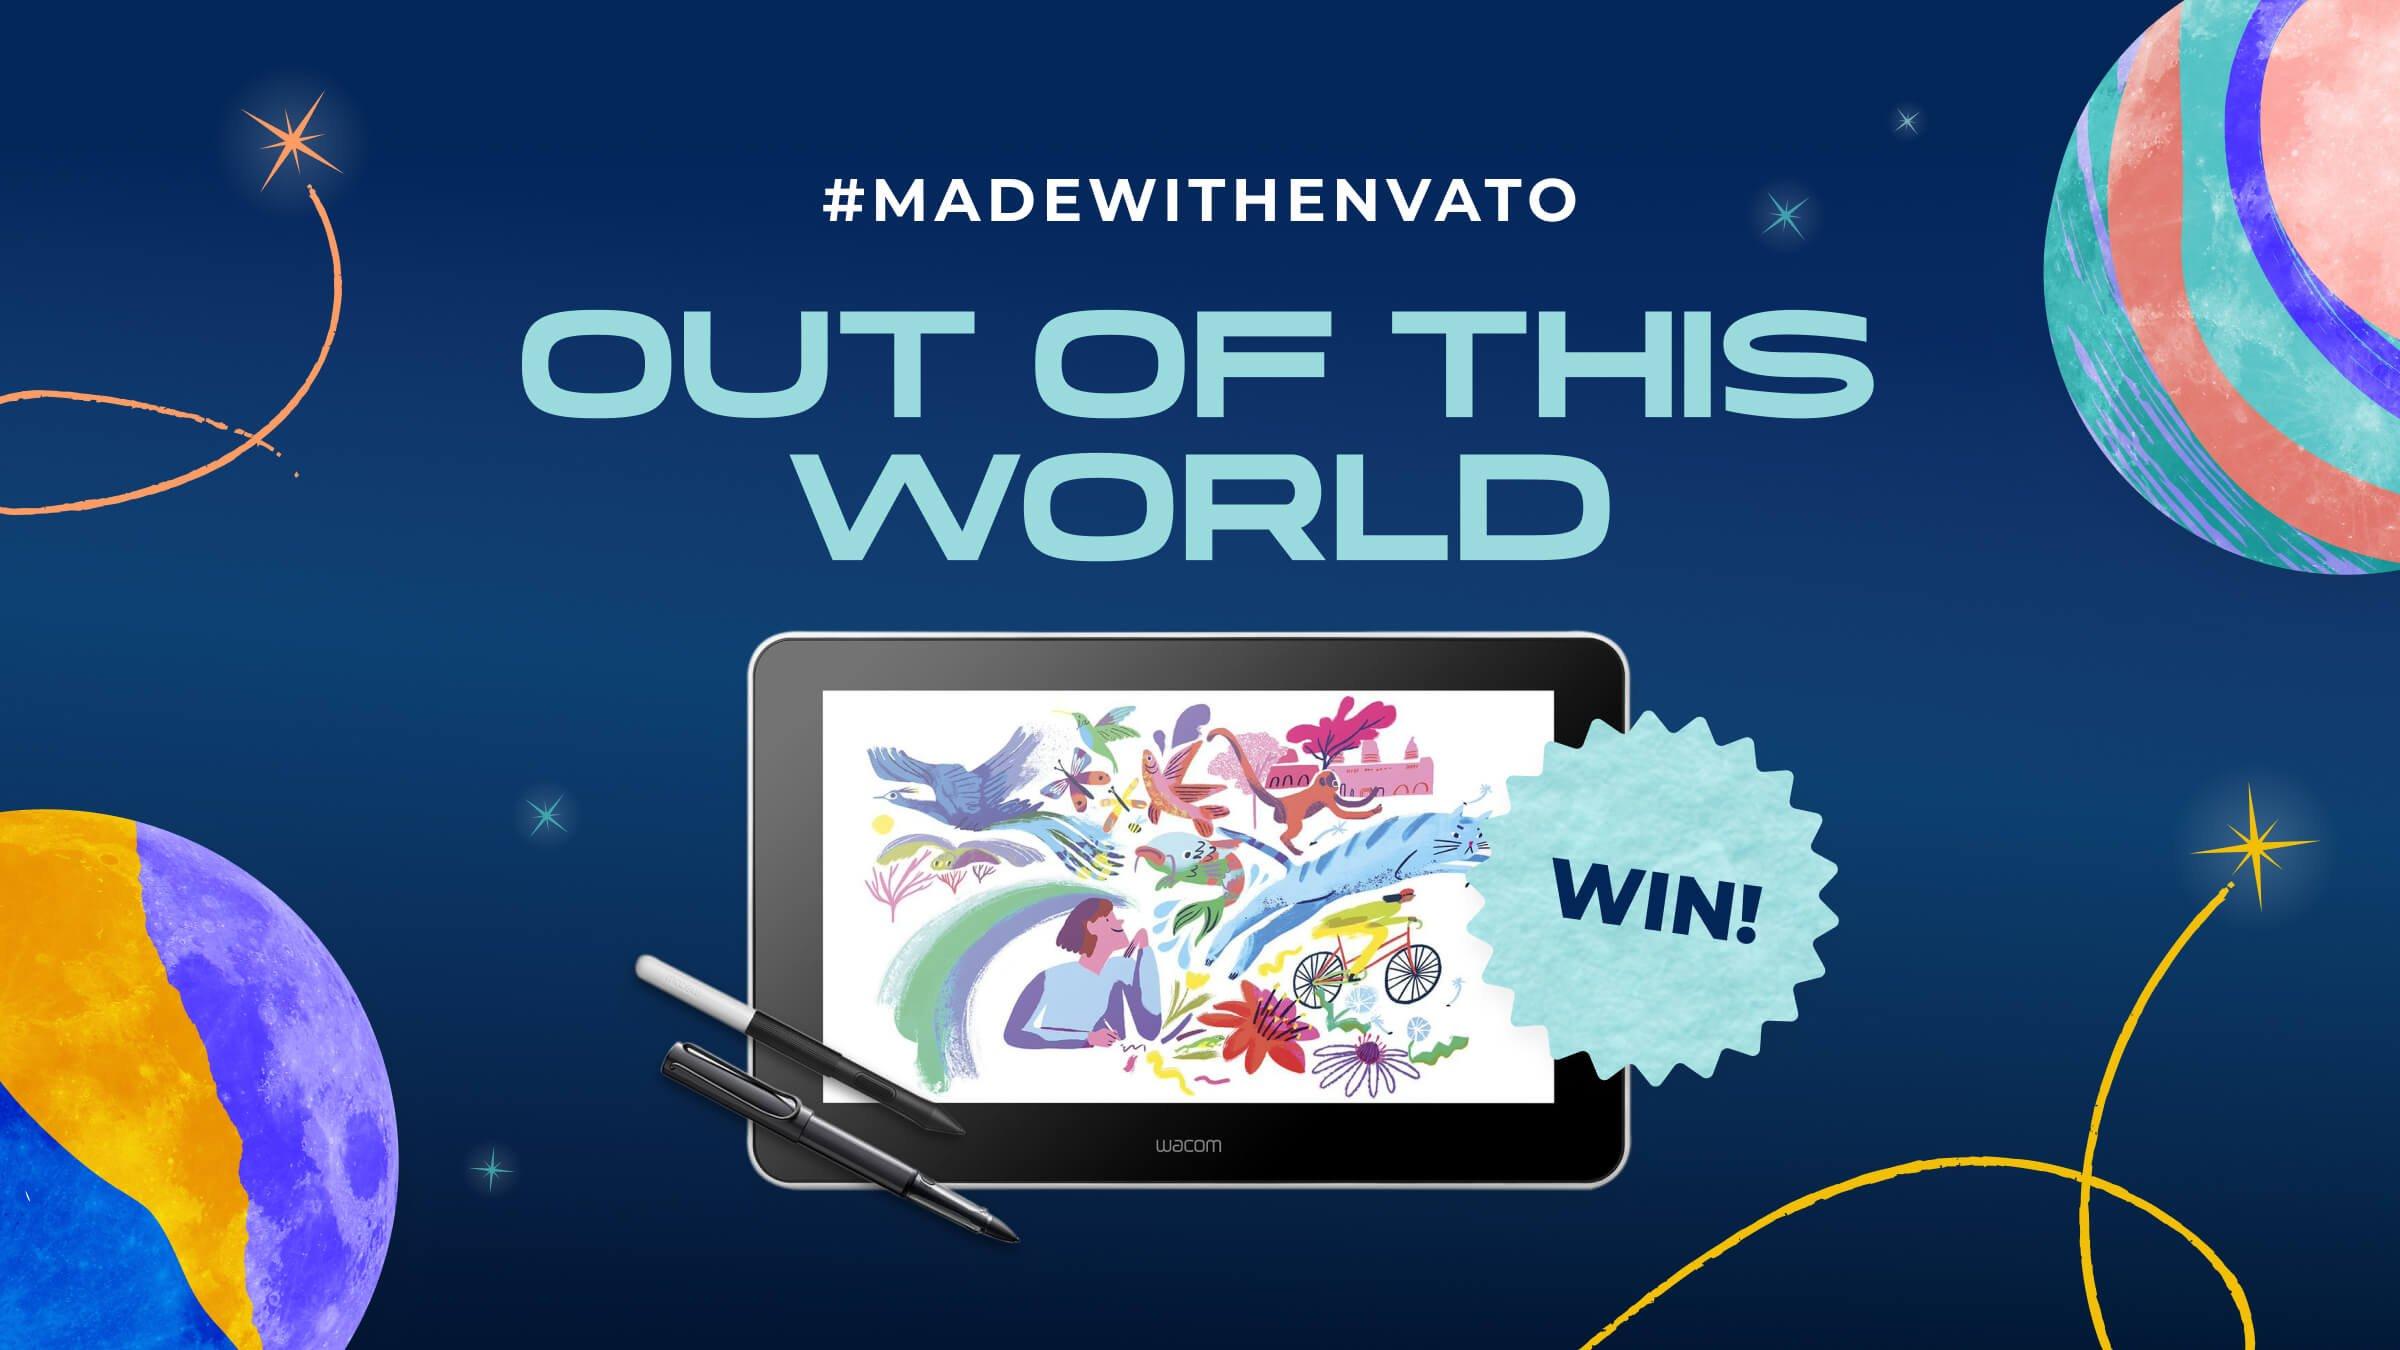 Enter Our #MadeWithEnvato Out of This World Competition for the Chance to Win a Wacom Tablet!